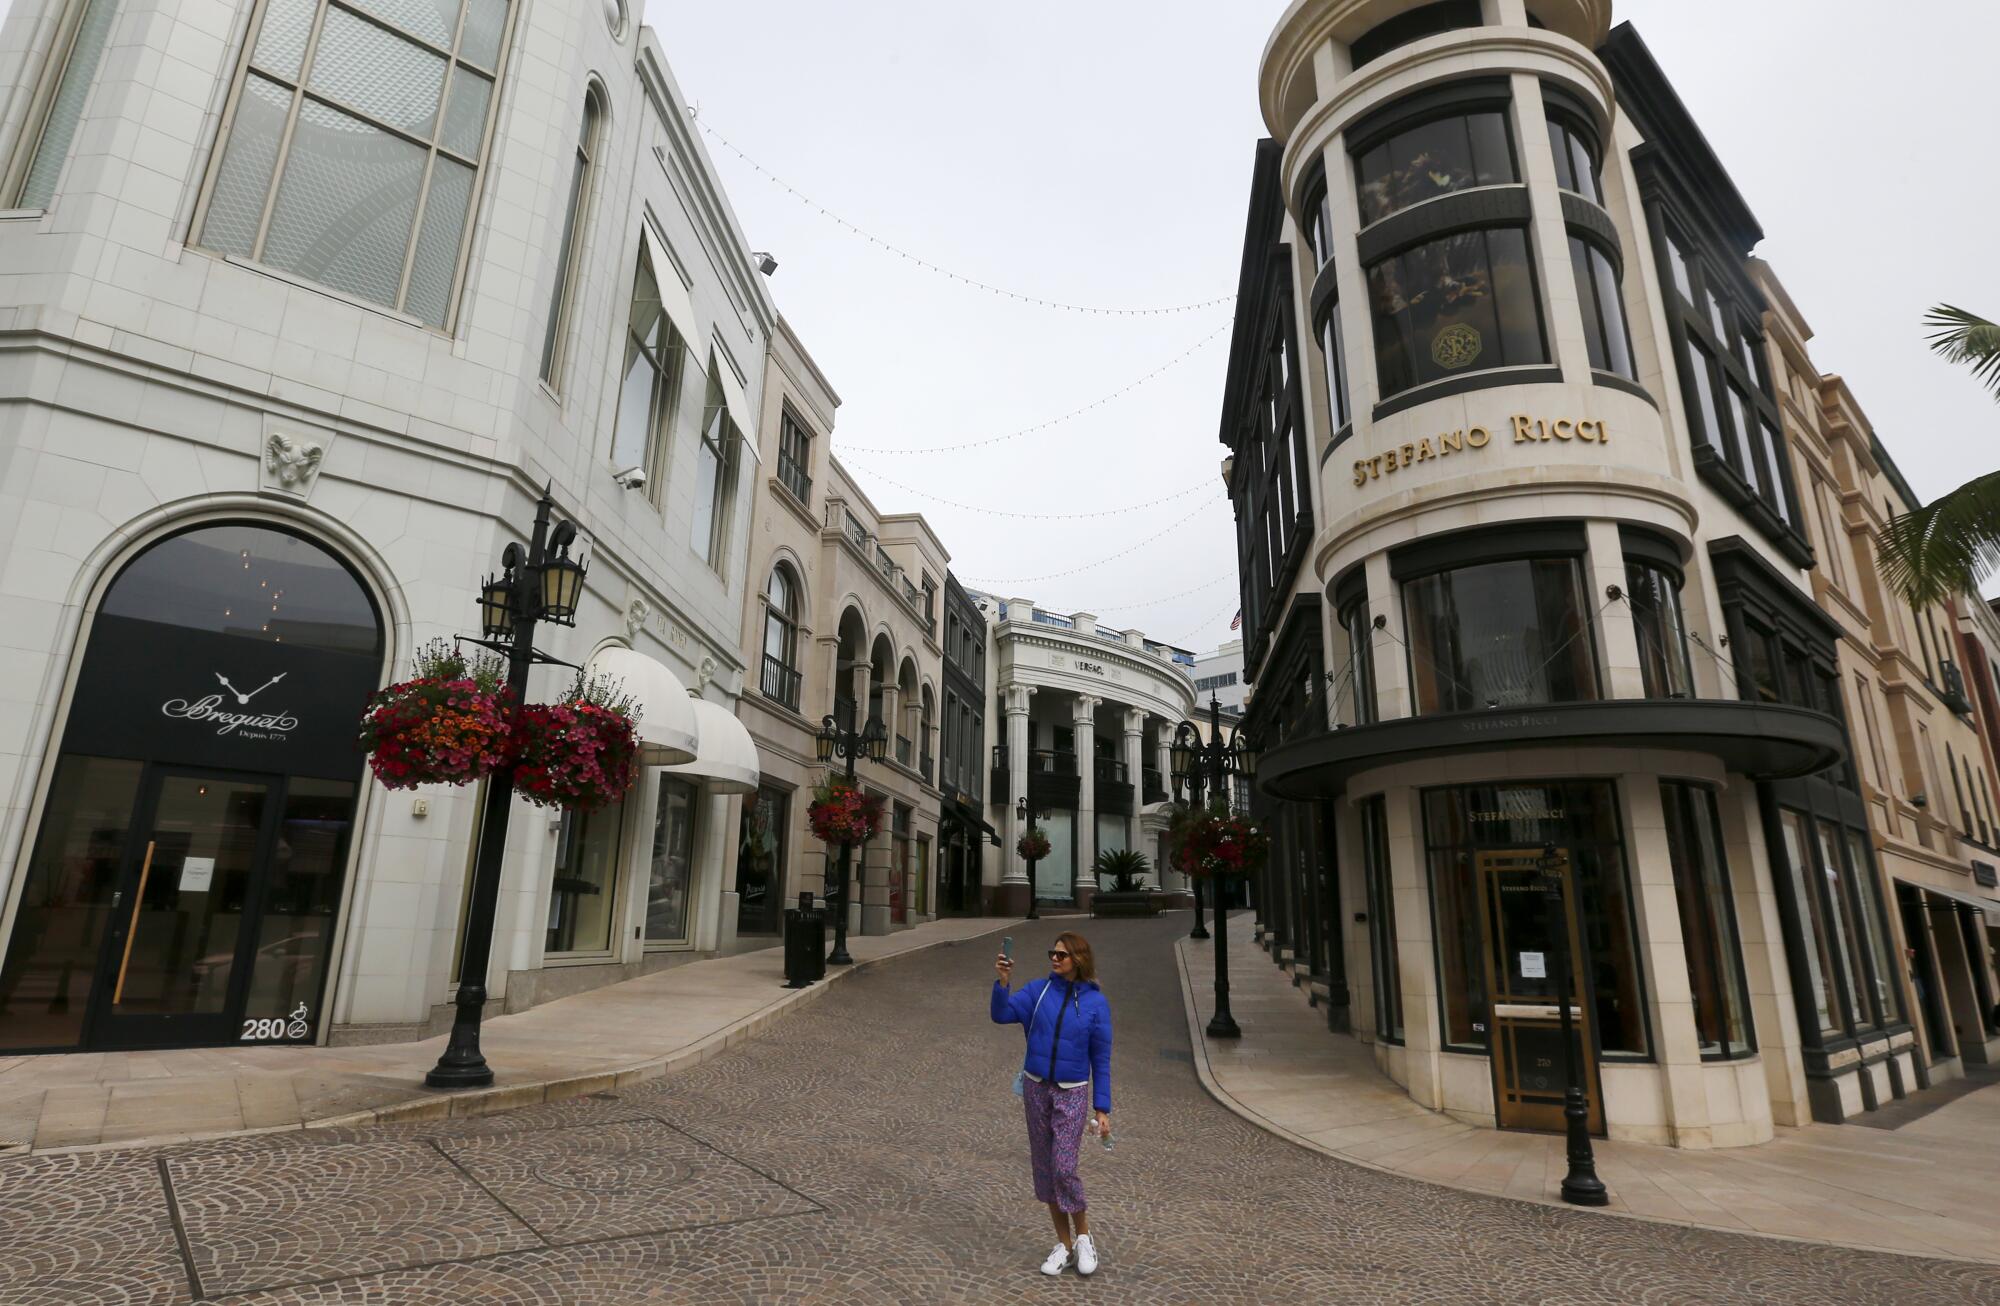 A woman uses a smartphone to record the scene along Rodeo Drive in Beverly Hills, where shops were closed and streets largely devoid of people on March 20.